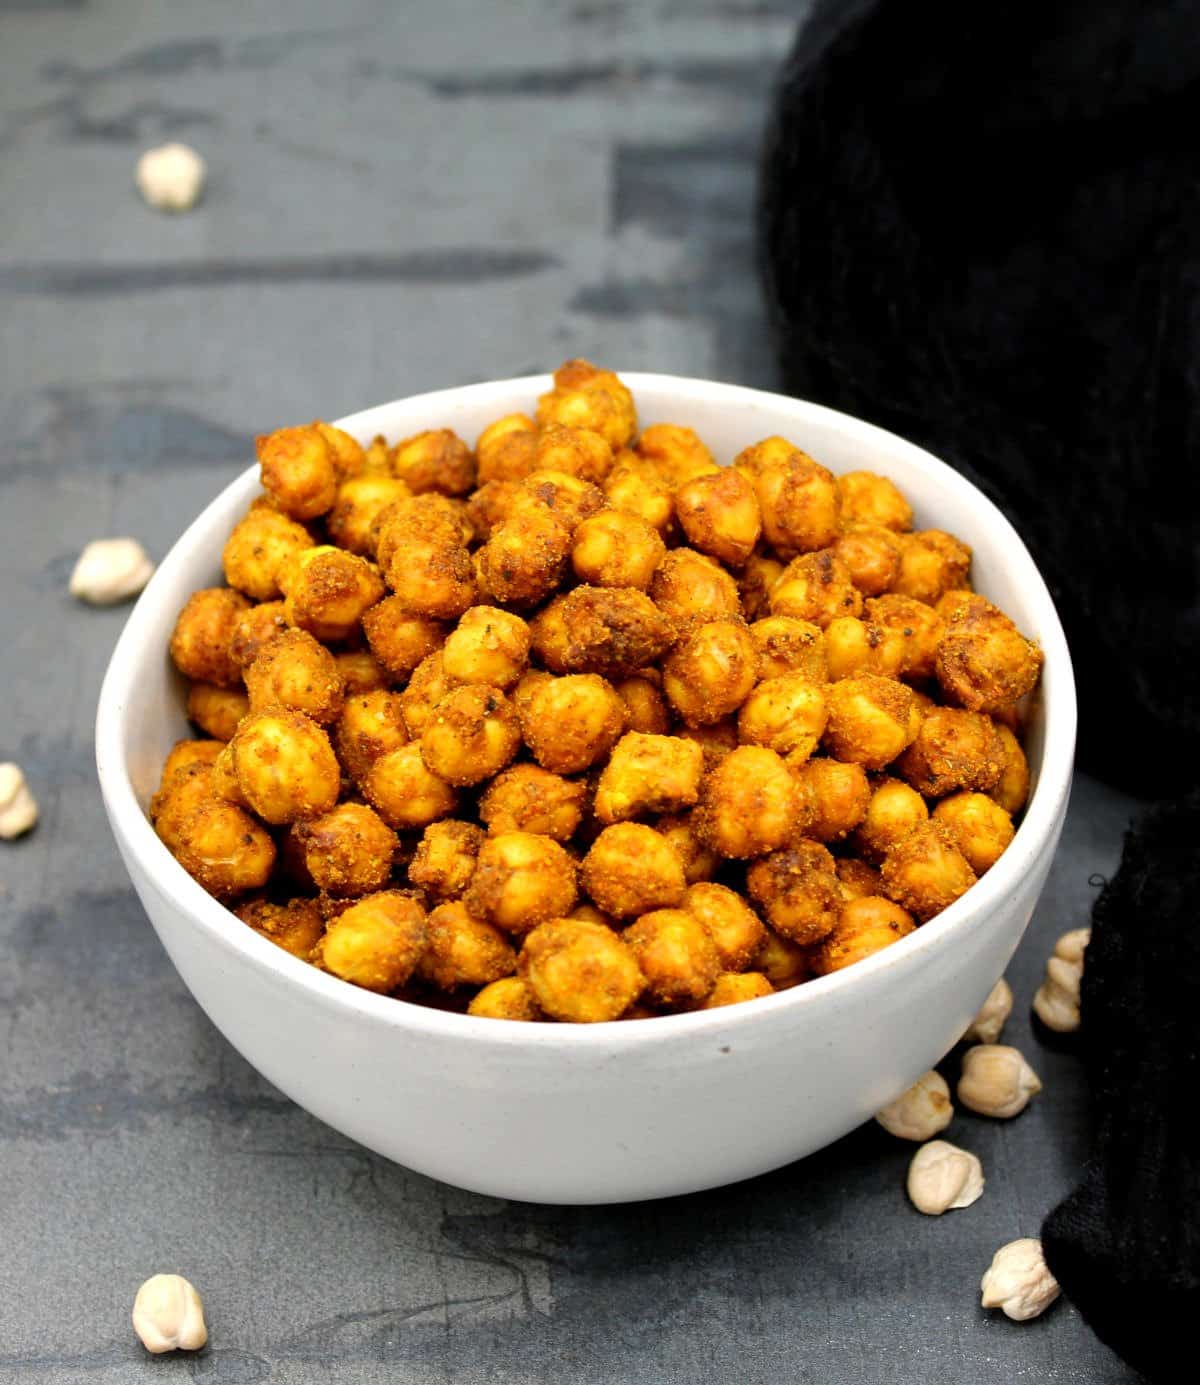 Crispy air fryer chickpeas piled in a gray bowl with chickpeas scattered around.